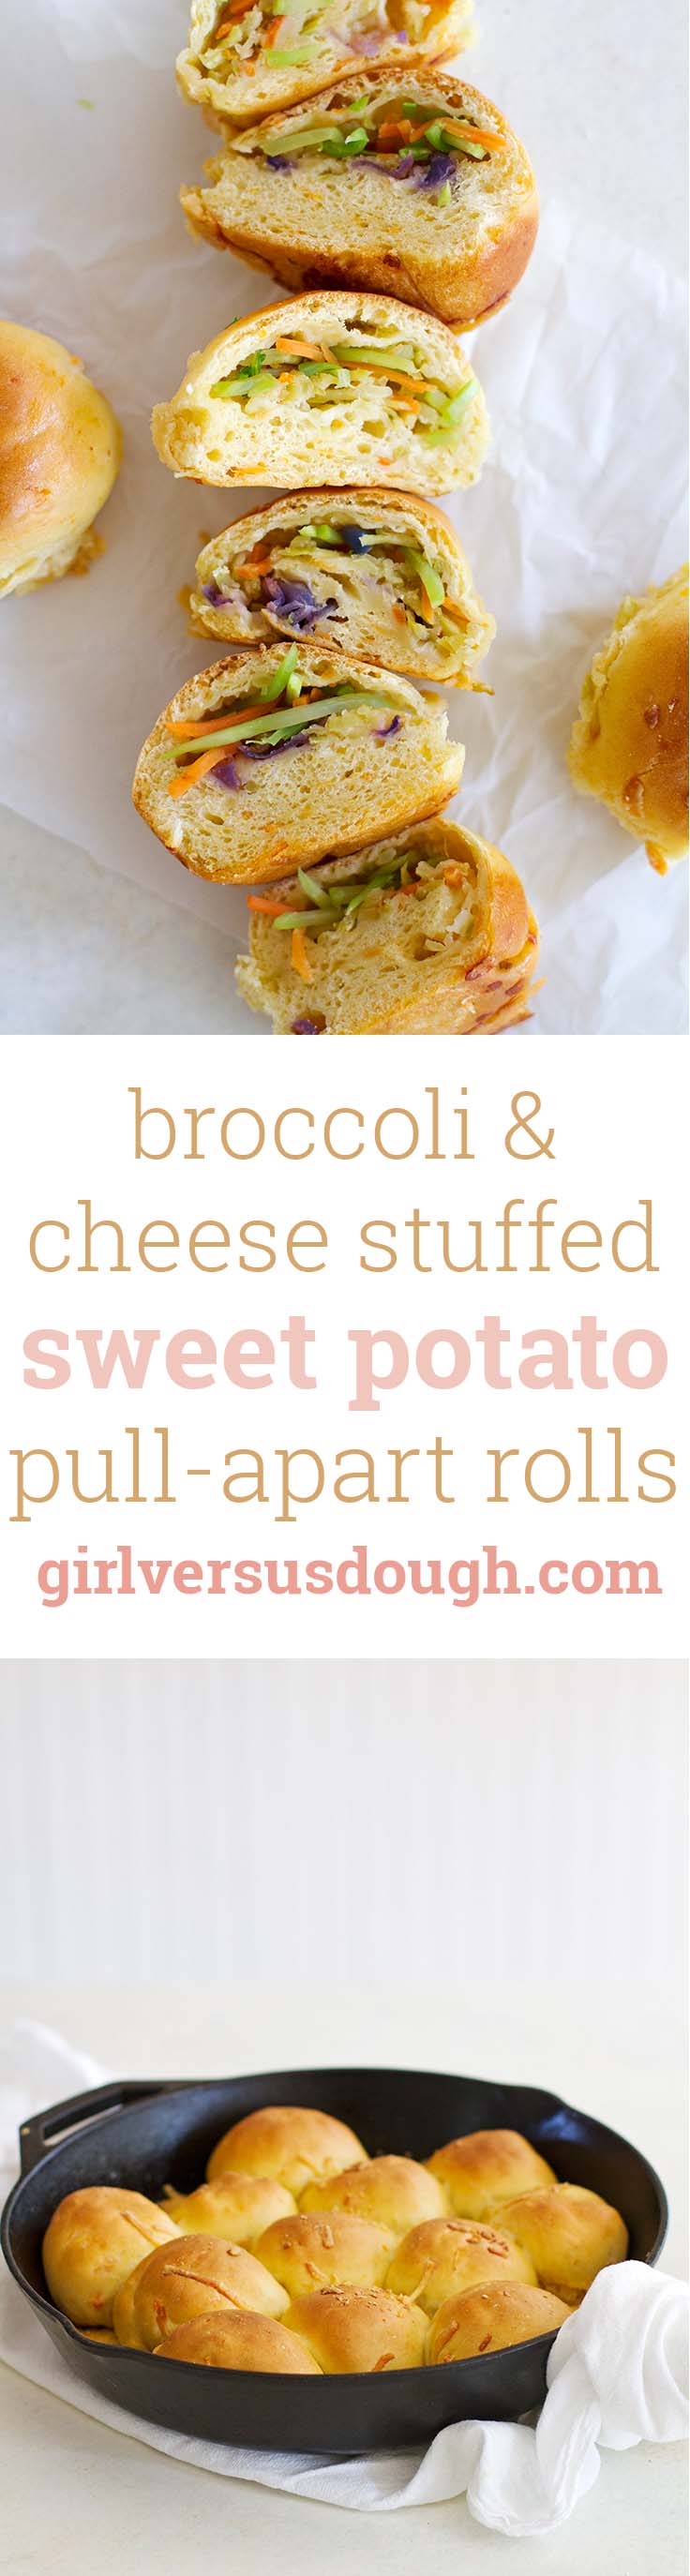 Broccoli and Cheese Stuffed Pull-Apart Sweet Potato Rolls -- Easy and delicious skillet rolls filled with fresh veggies and melted cheese. girlversusdough.com @girlversusdough